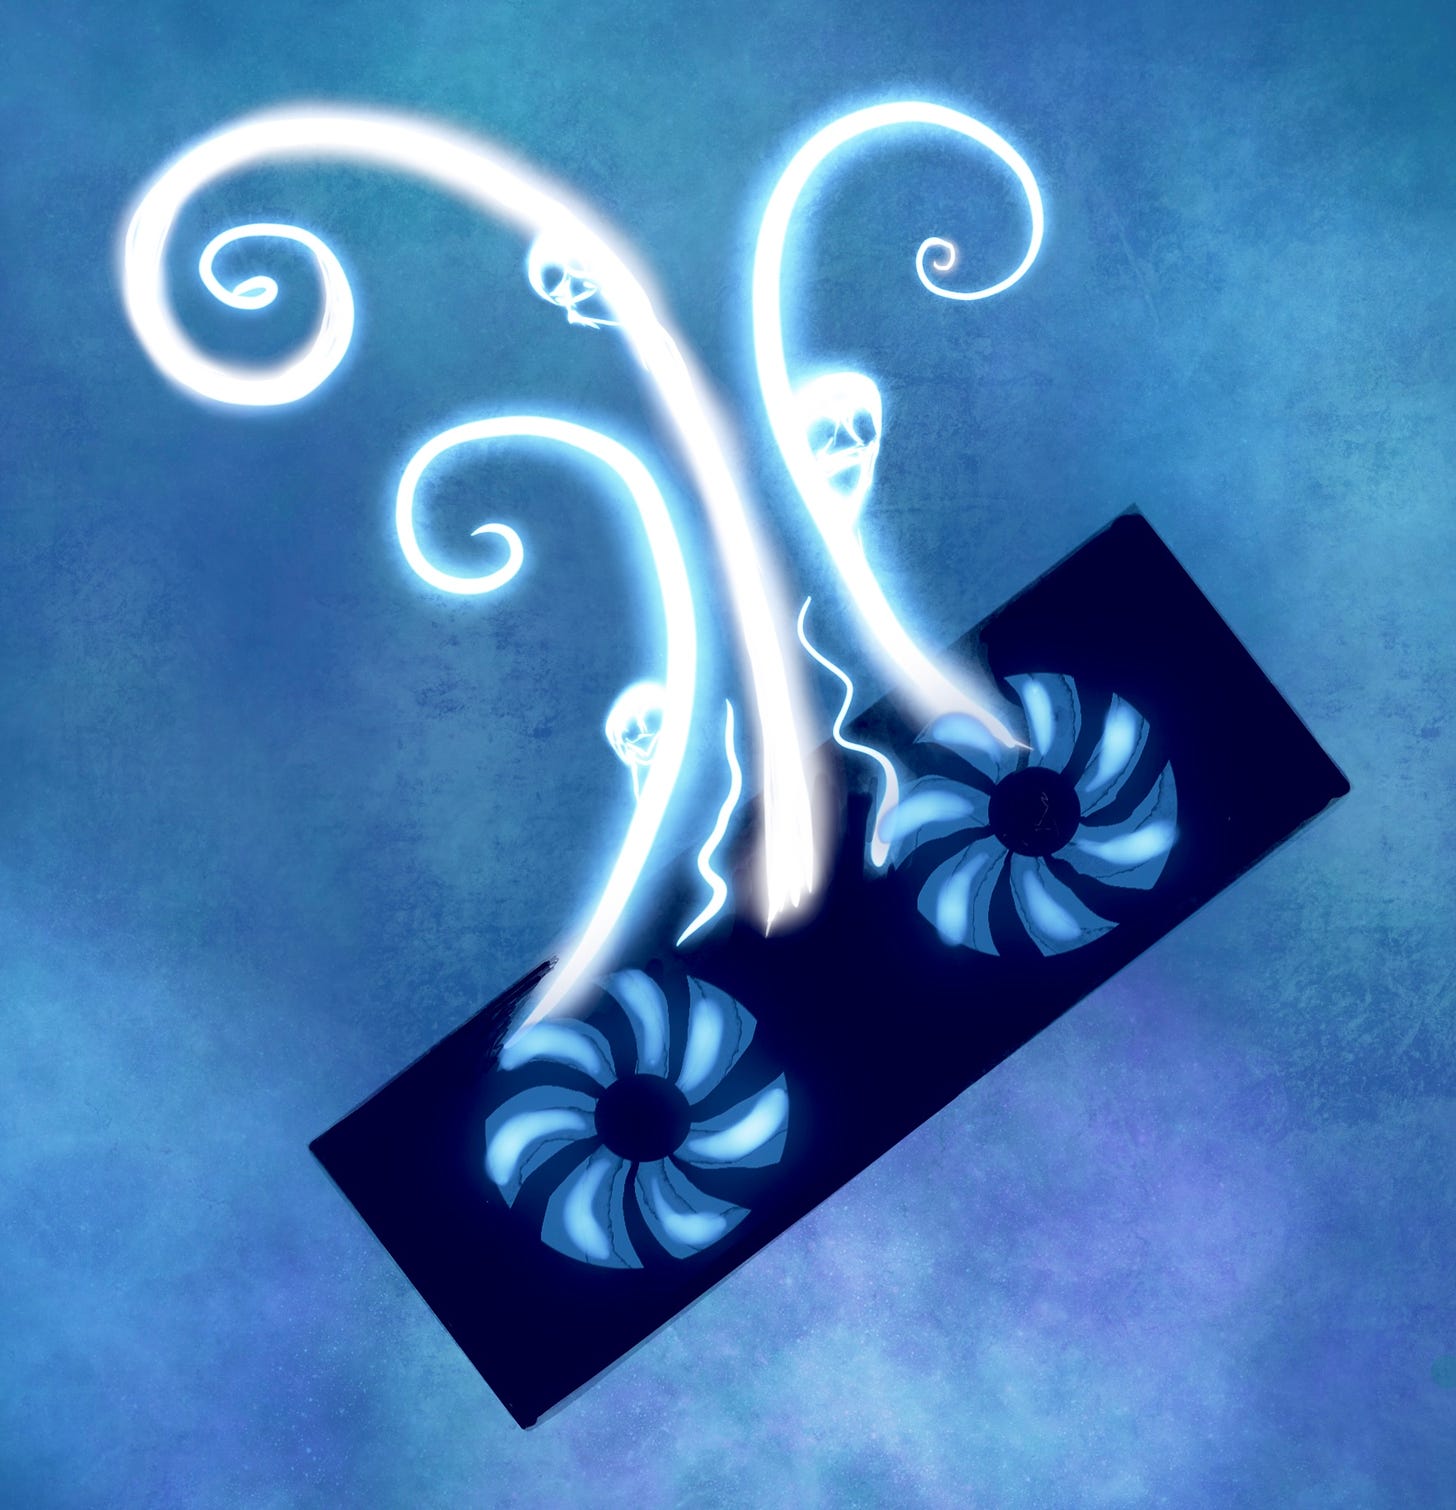 Simplified black GPU image with white glowing "ghostly" tendrils, blue background: abstract representation of "Pandora's bot"